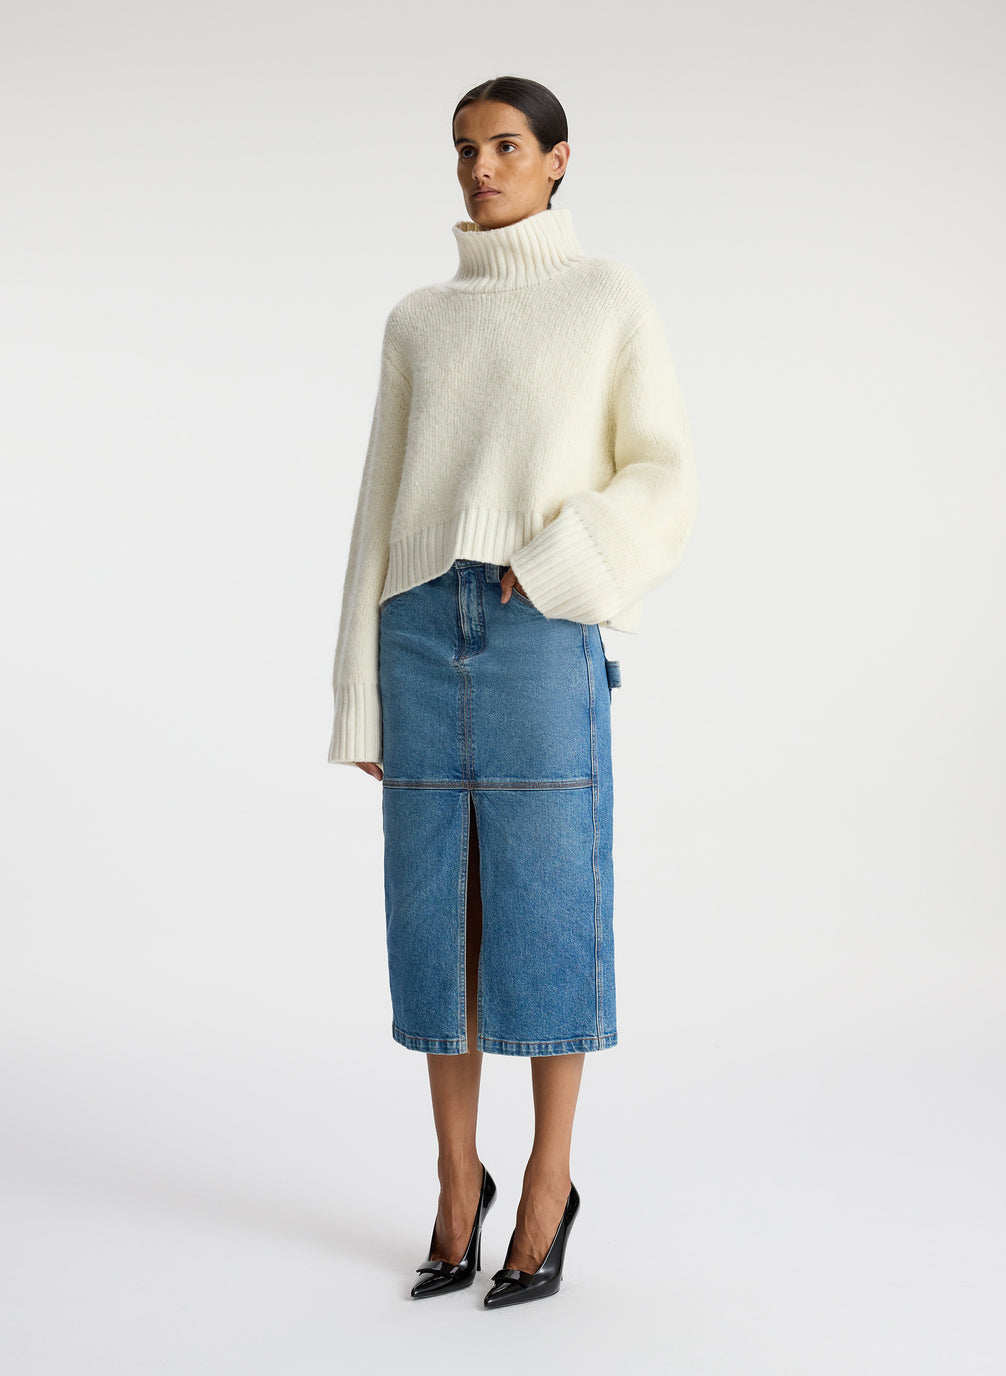 side view of woman wearing white turtleneck sweater and denim midi skirt